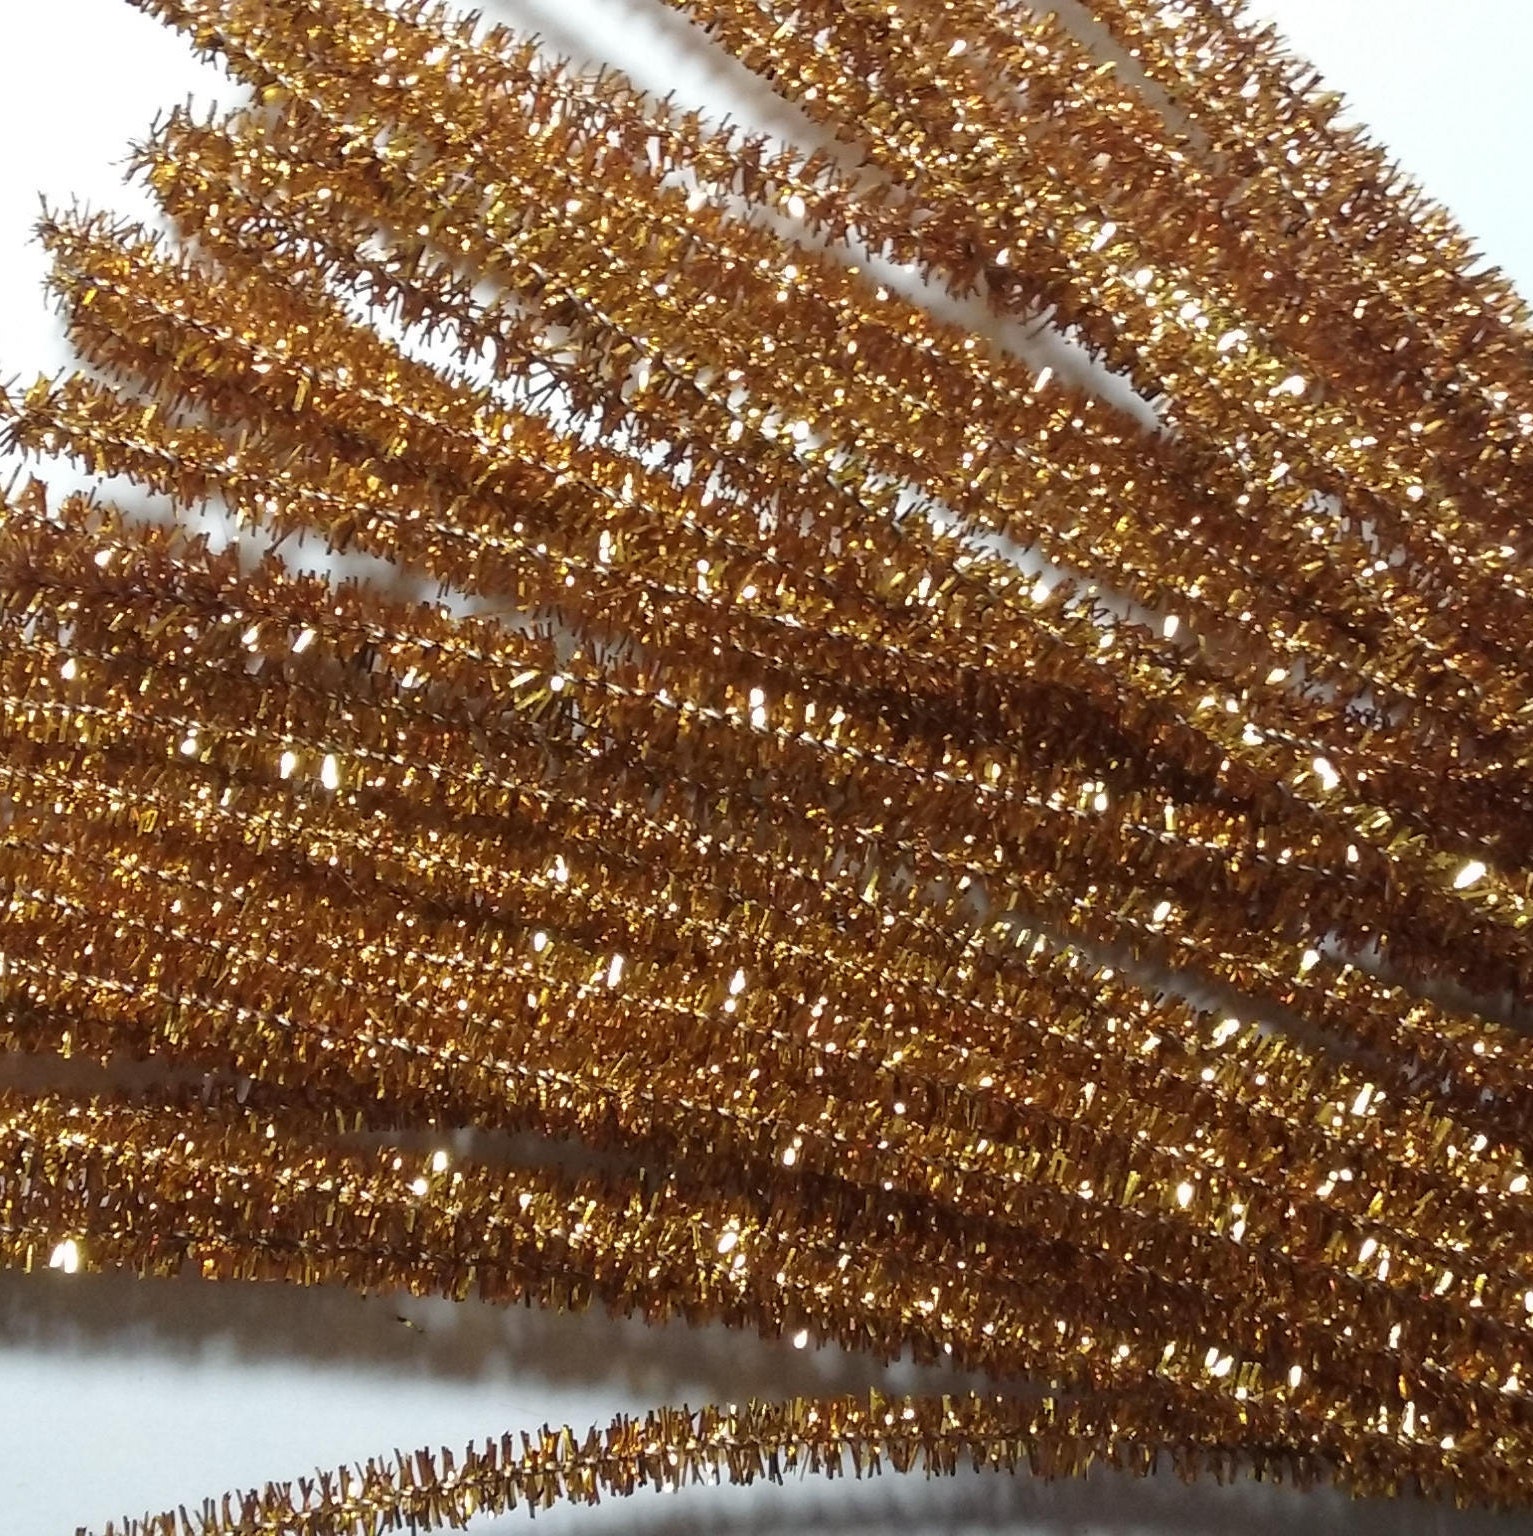 Gold Sparkle Chenille Stems Pipe Cleaners Craft Supply Metallic